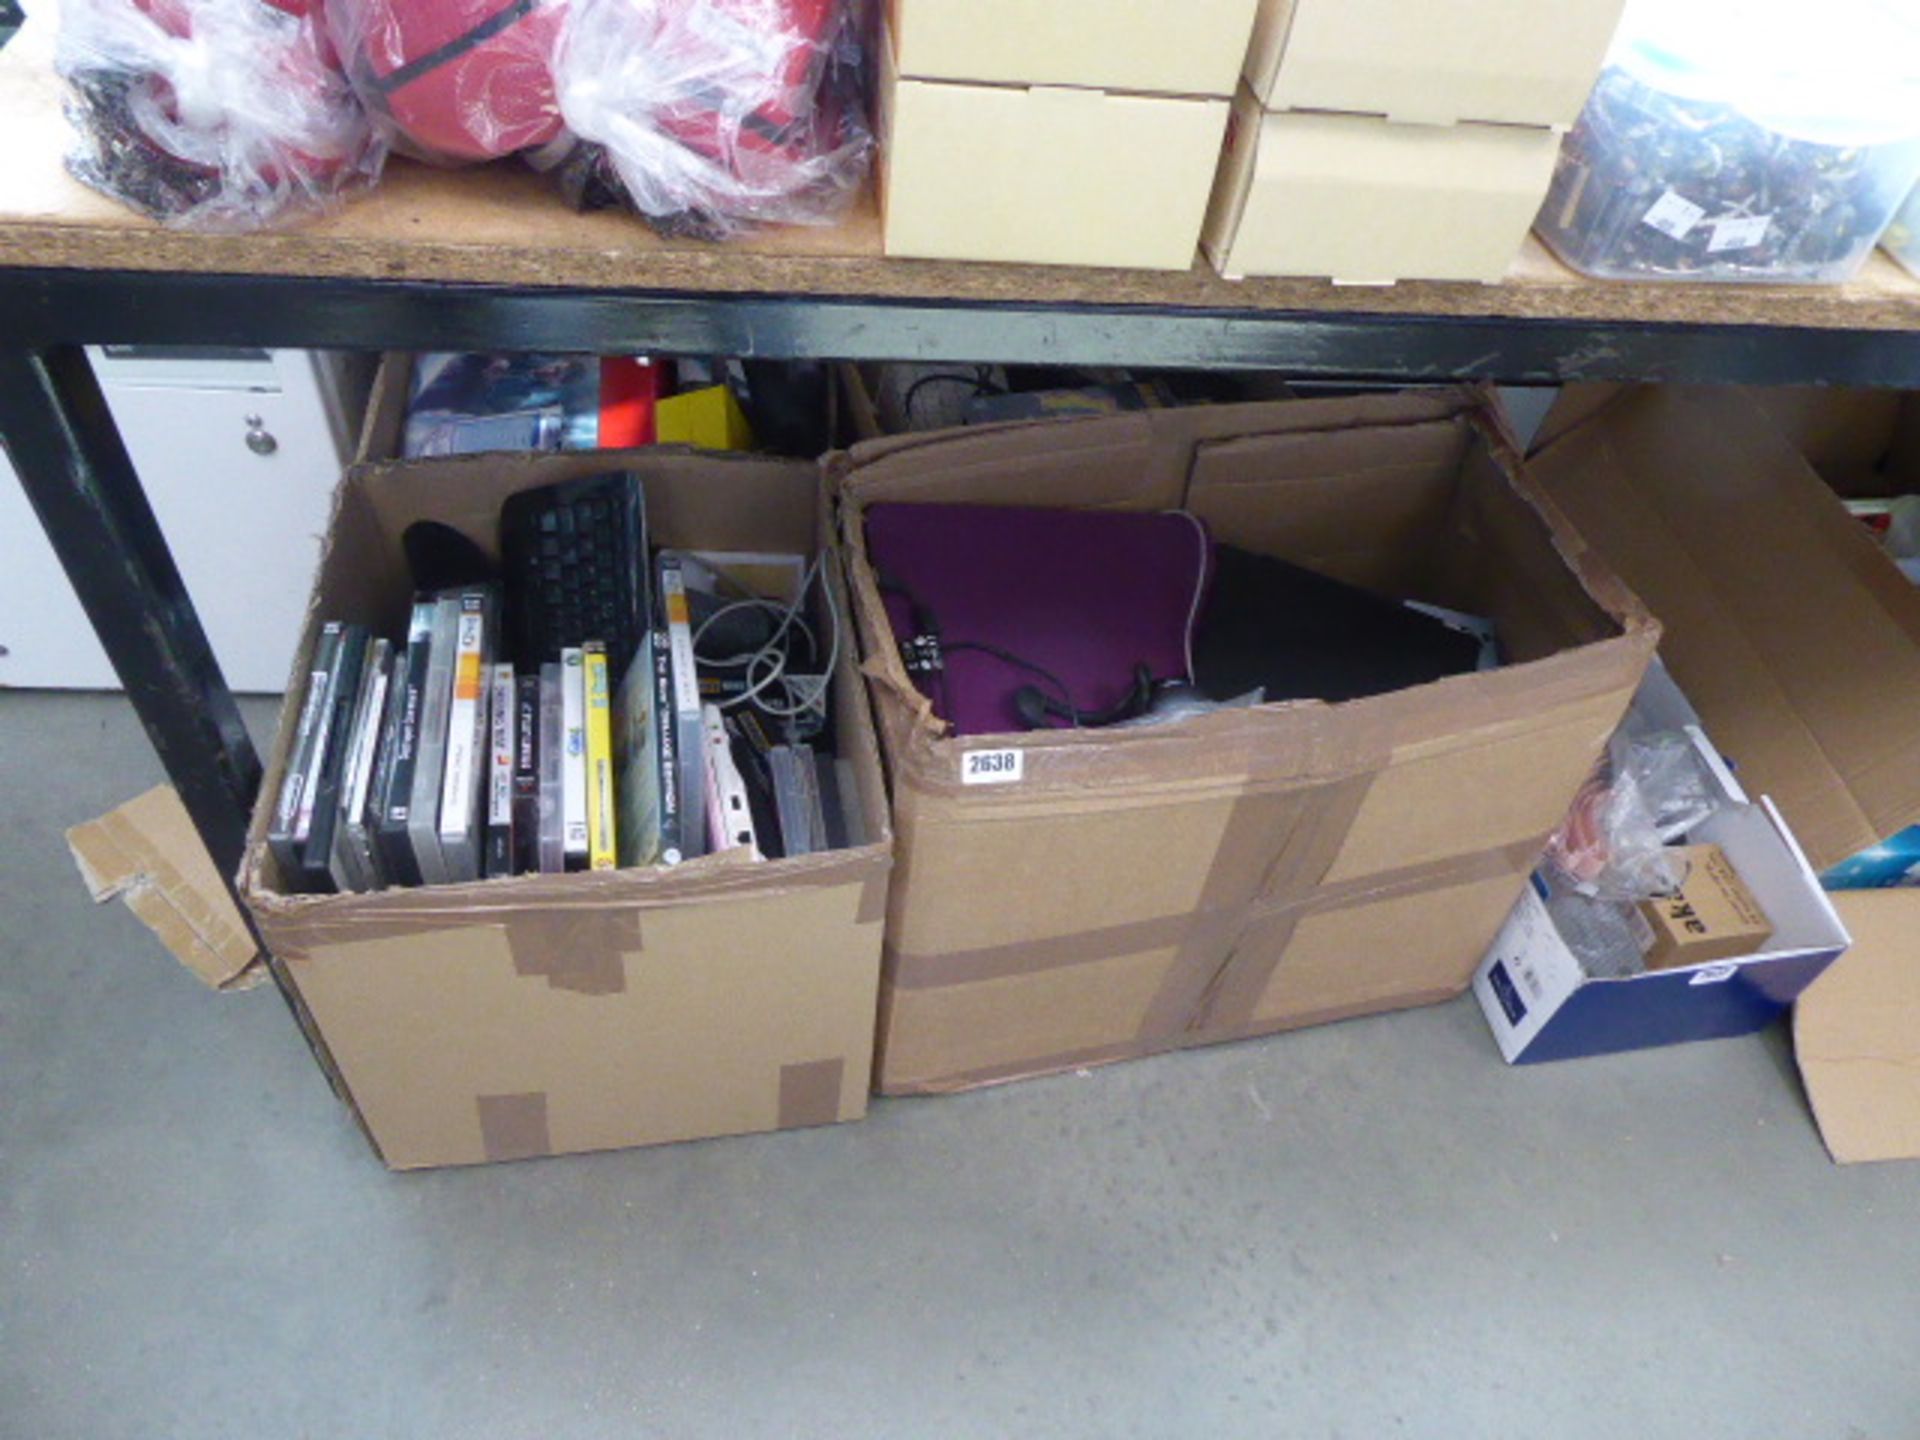 Selection of various PC related games, peripherals, keyboards and other accessories in 4 boxes